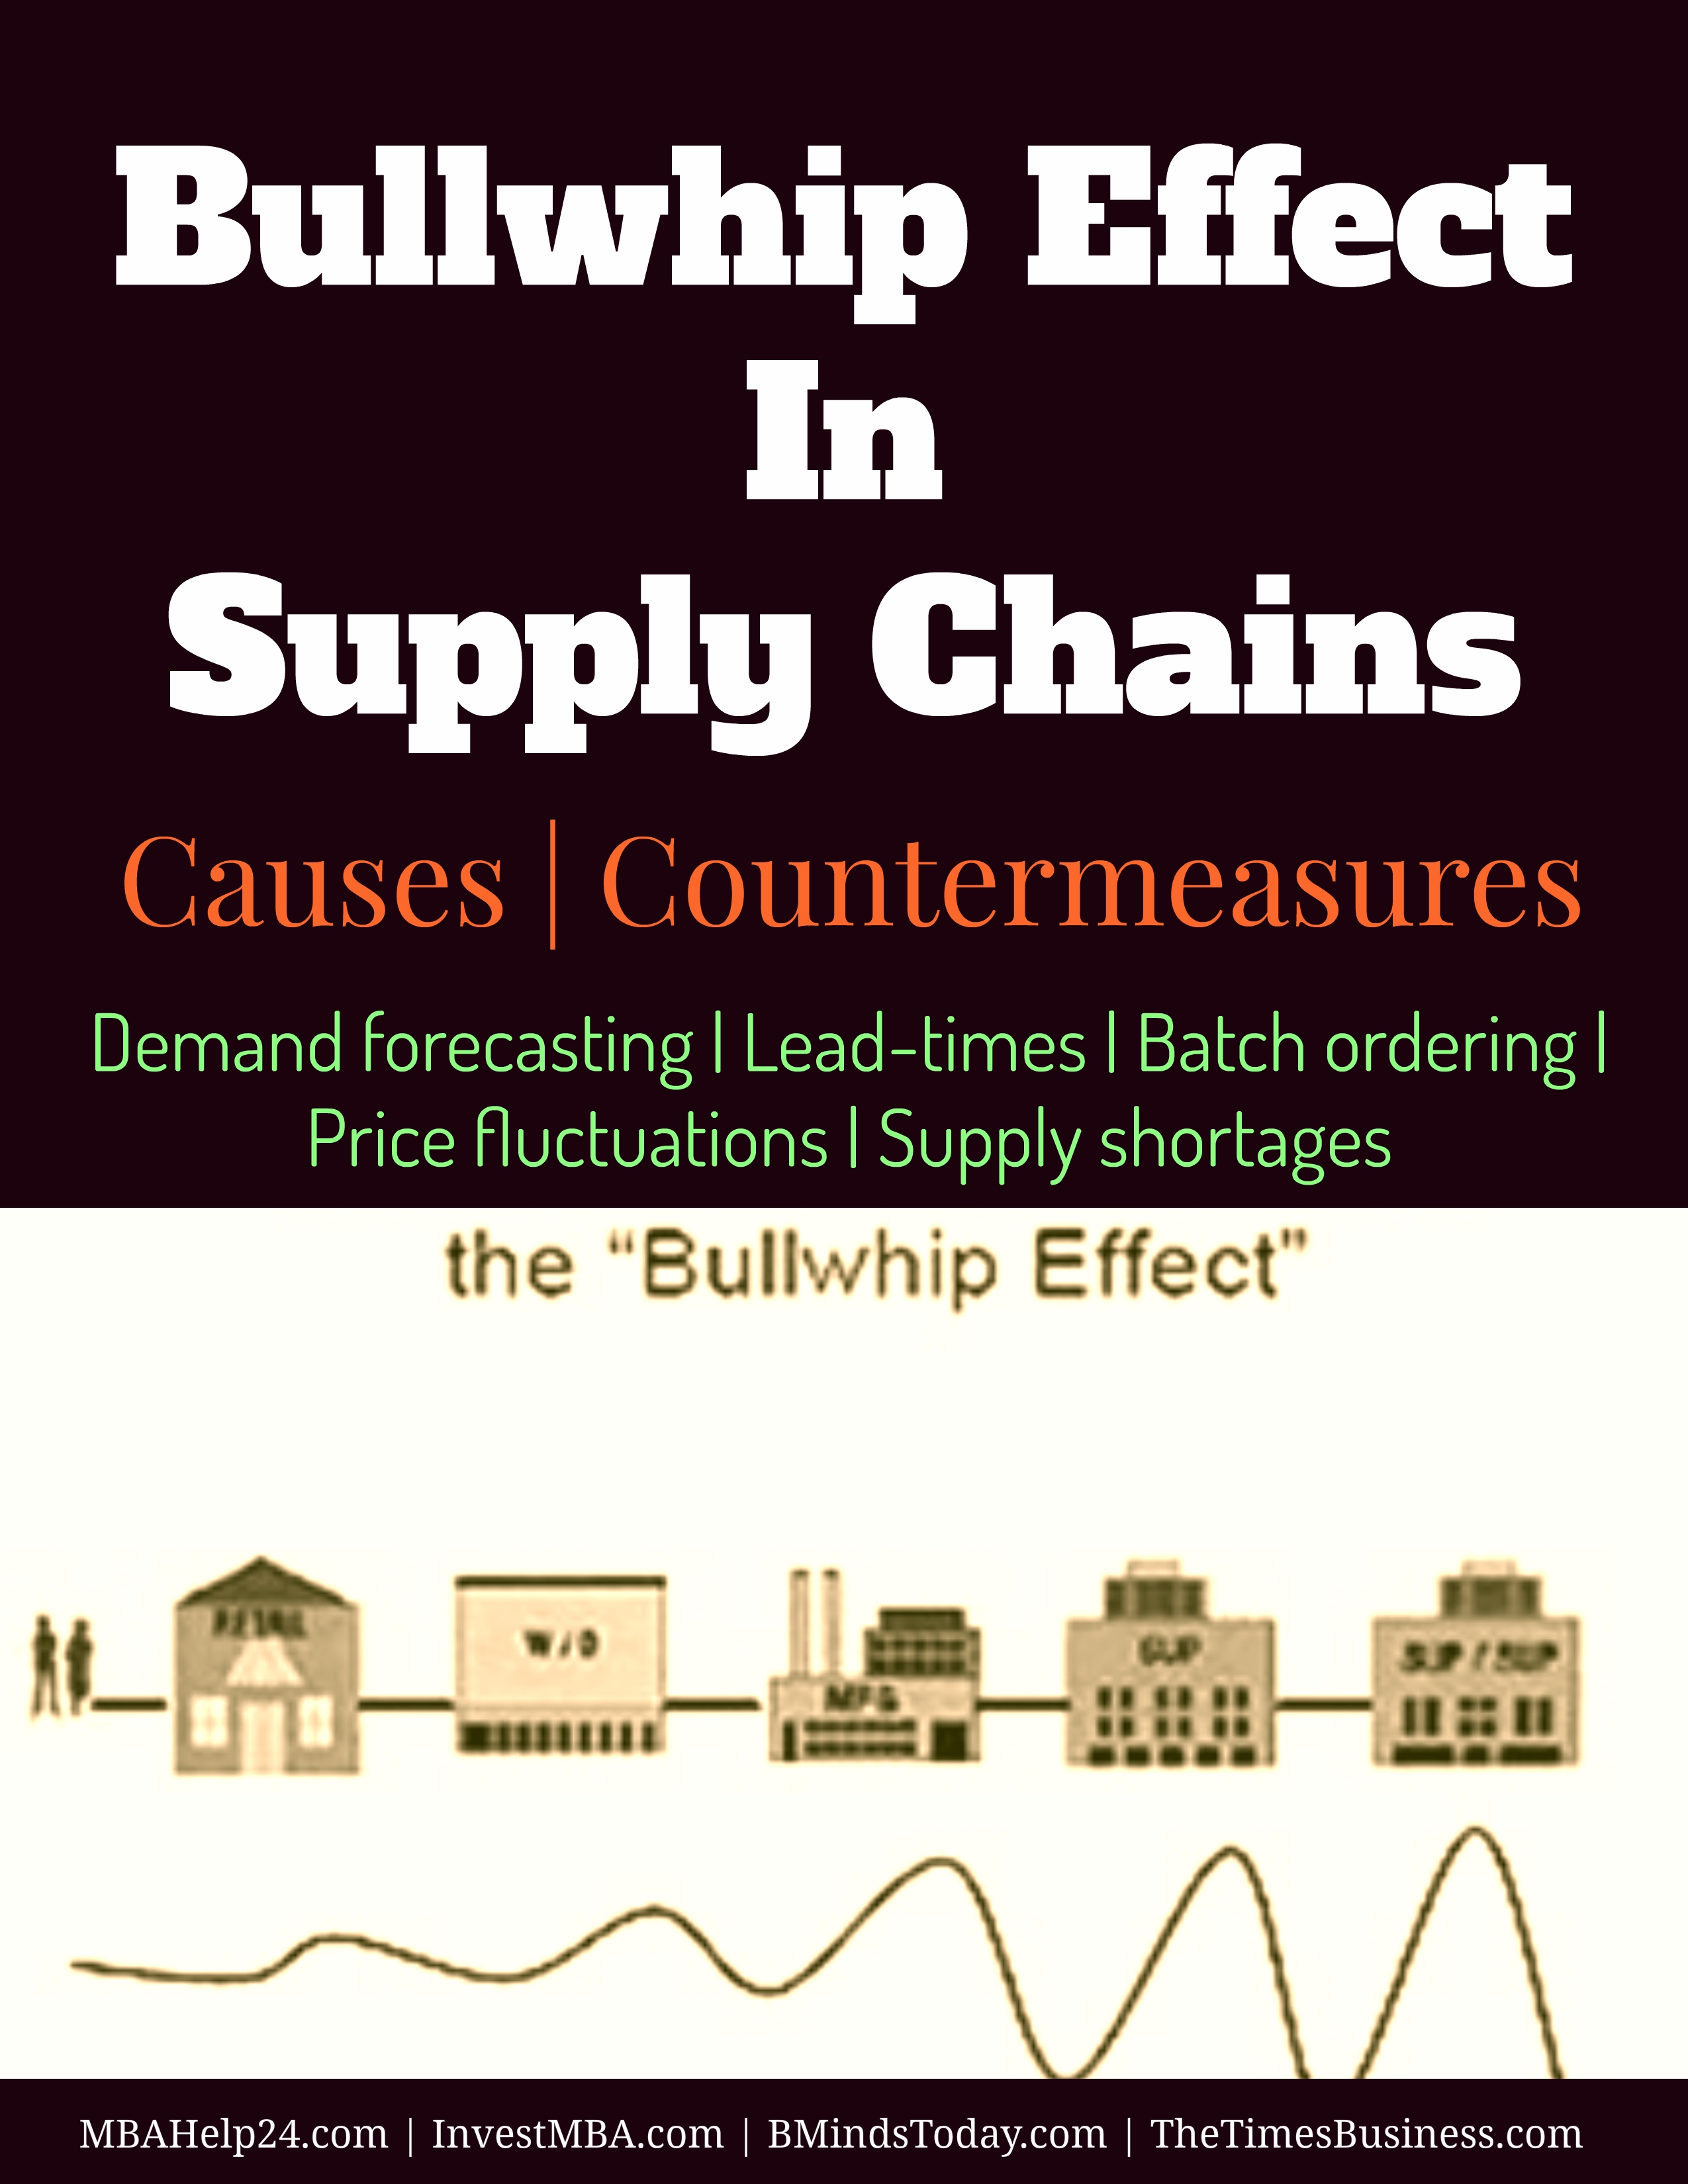 The Bullwhip Effect In Supply Chains | Causes | Countermeasures | Demand forecasting | Lead-times | Batch ordering | Price fluctuations | Supply shortages  Bullwhip Effect The Bullwhip Effect In Supply Chains | Causes | Countermeasures Bullwhip Effect In Supply Chains Causes Countermeasures